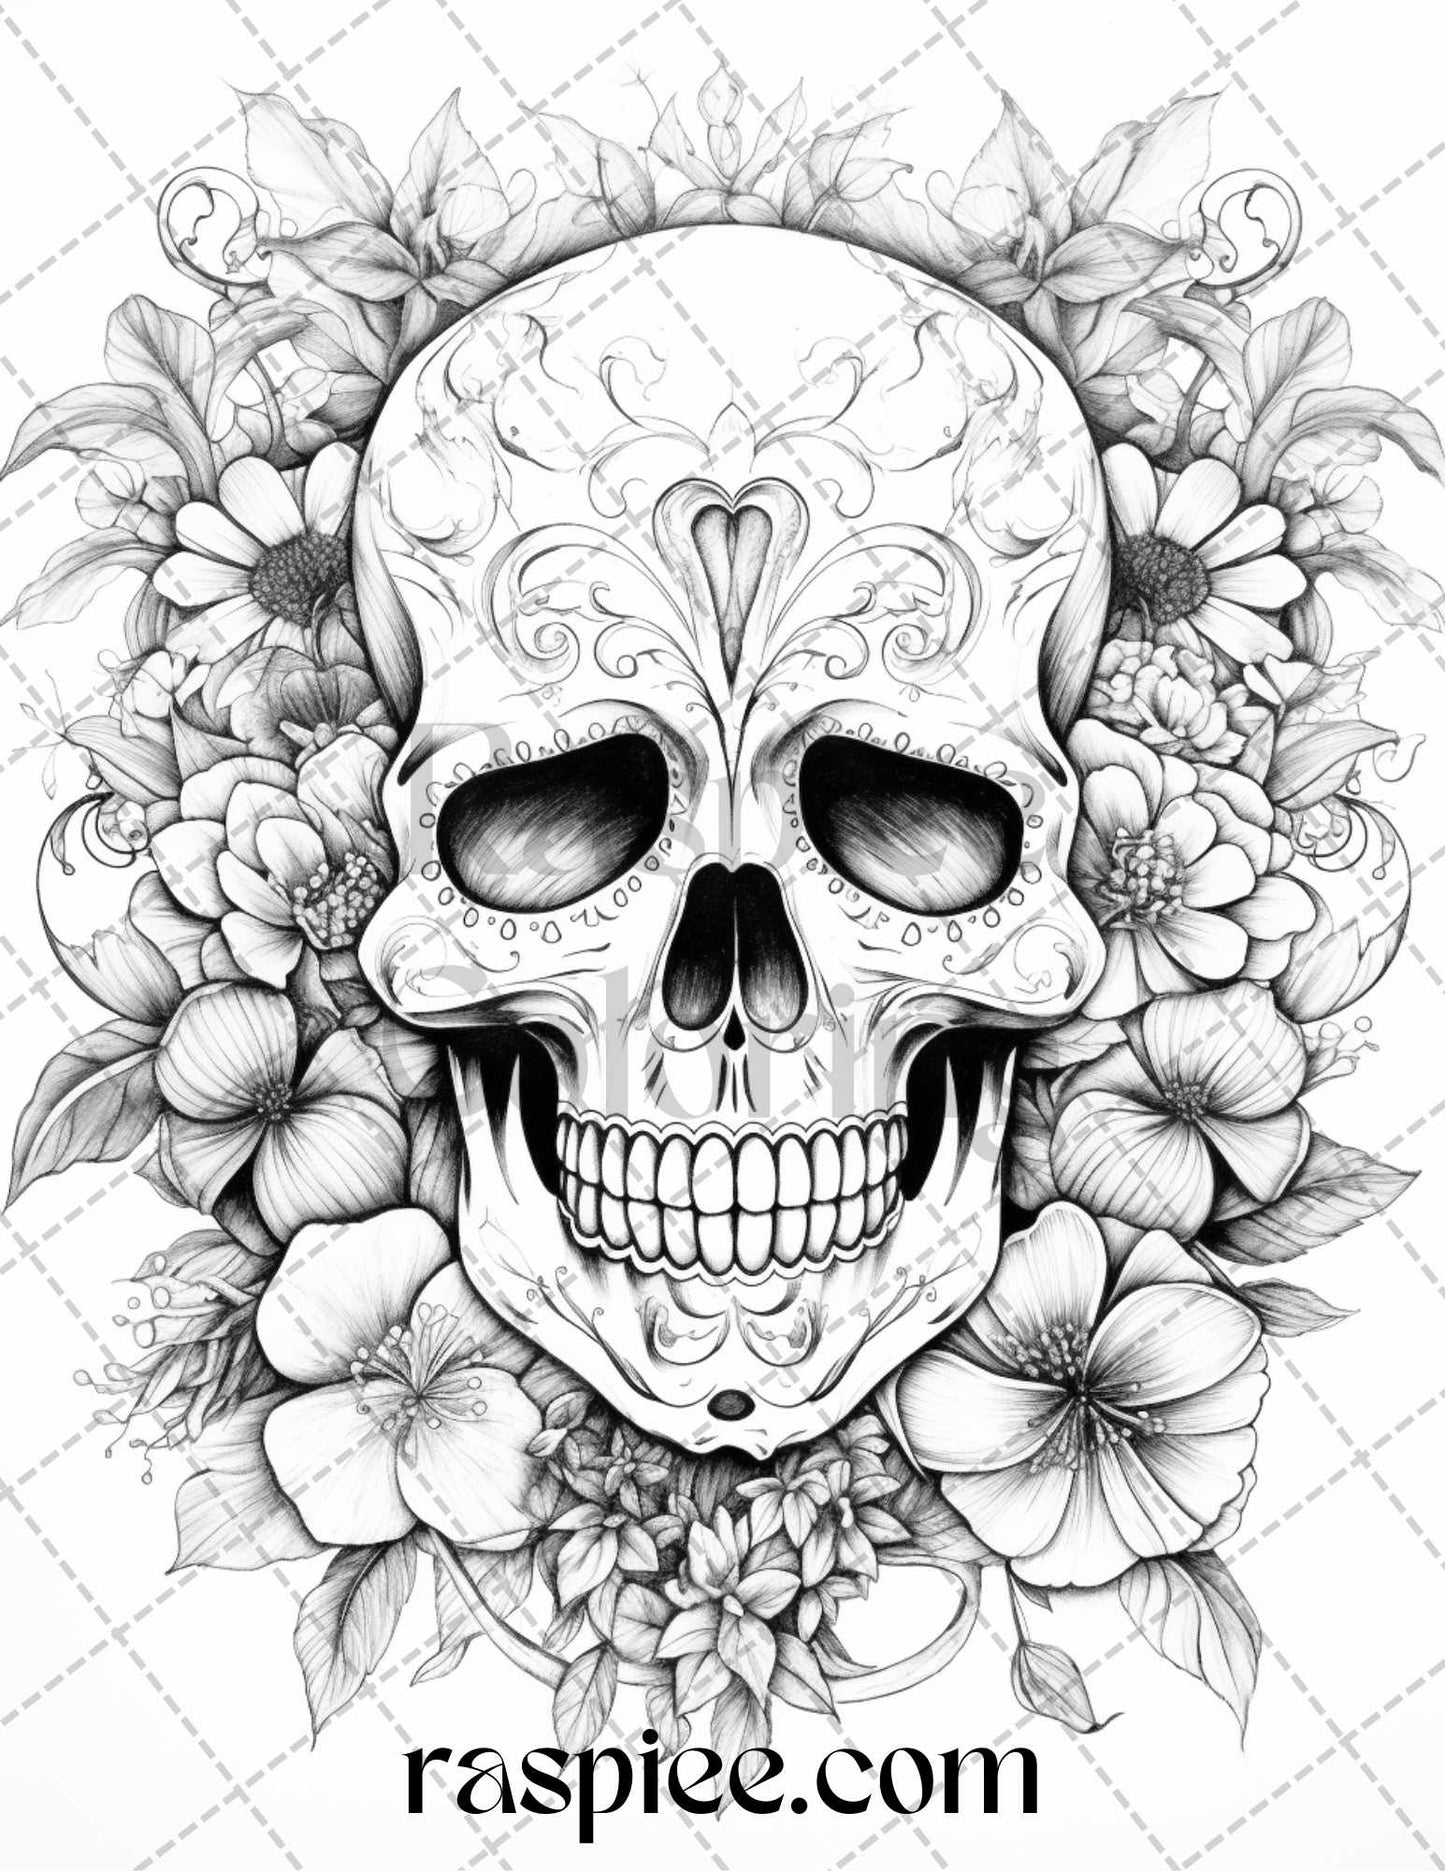 grayscale coloring pages, printable coloring sheets, adult coloring artwork, floral skull illustrations, stress relief DIY art, instant download printable, therapeutic grayscale designs, detailed floral patterns, intricate skull drawings